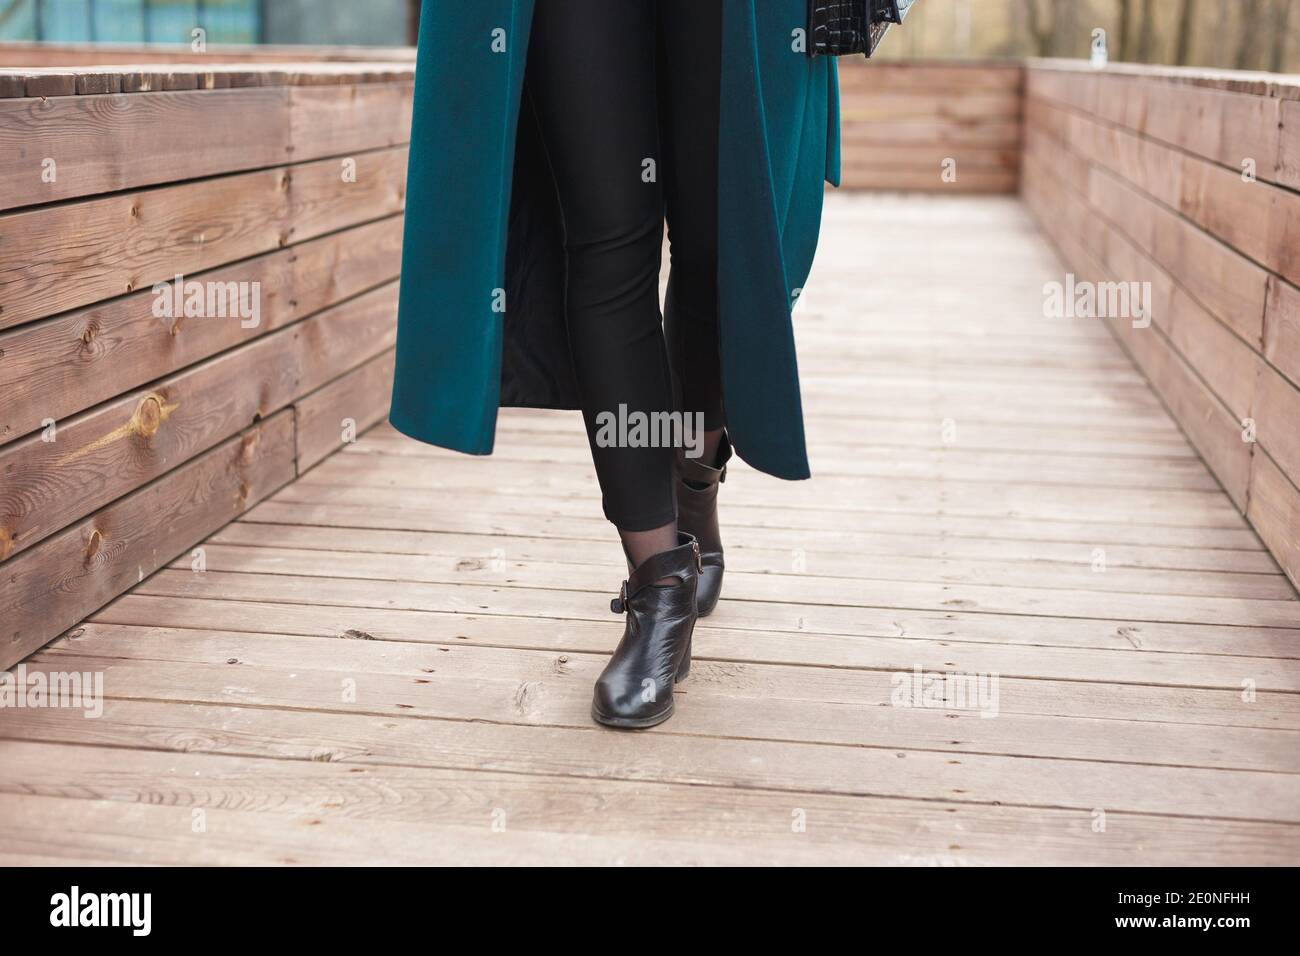 Black ankle boots, black leather bag, warm emerald coat and black trousers. Stylish and fashionable girl on a walk. Stock Photo